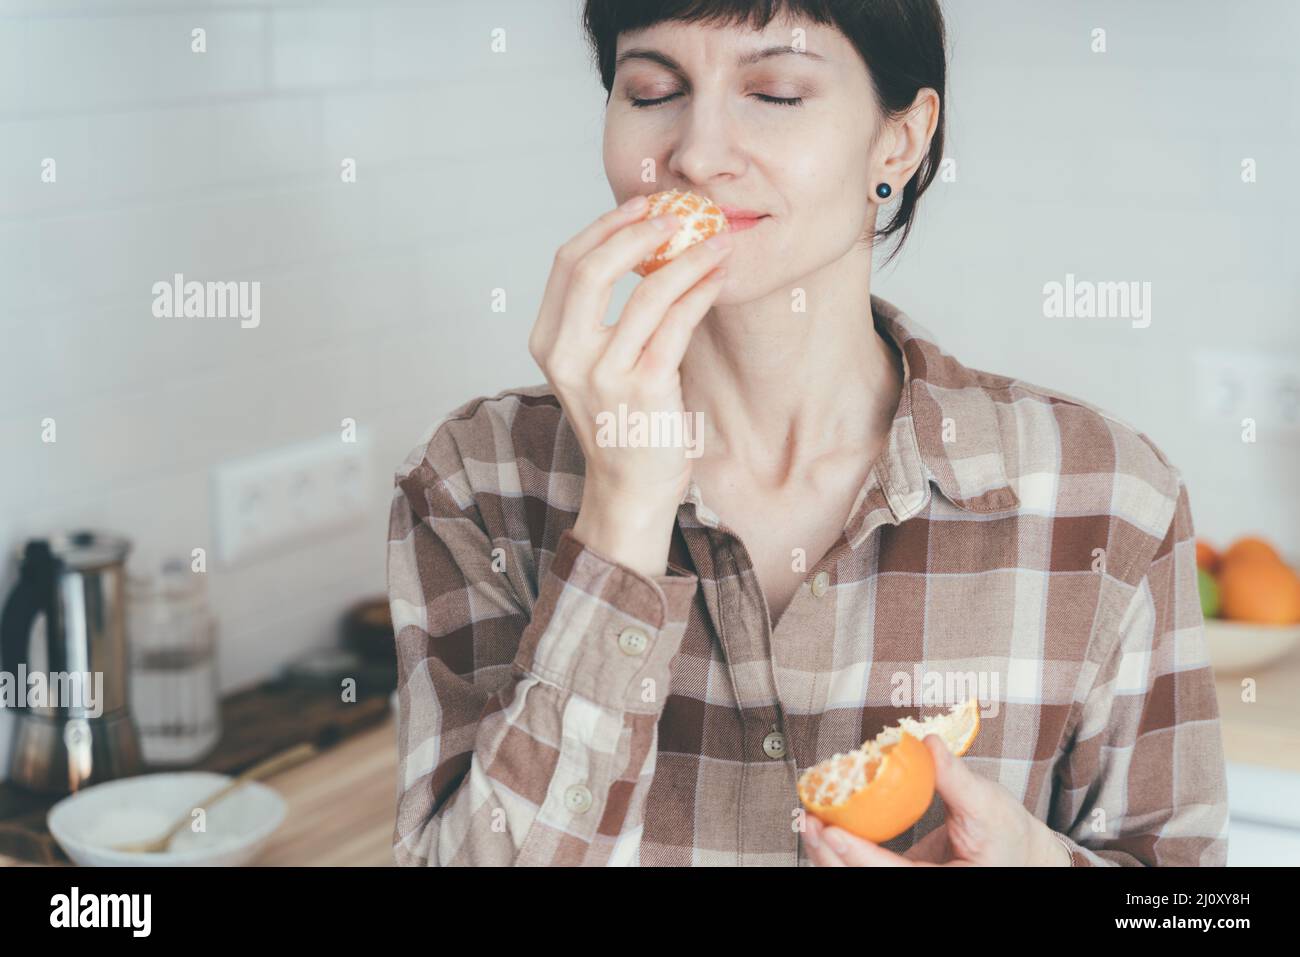 Anosmia, restore sense of smell. COVID-19 causes loss of smell. Happy woman sniffing citrus fruit Stock Photo